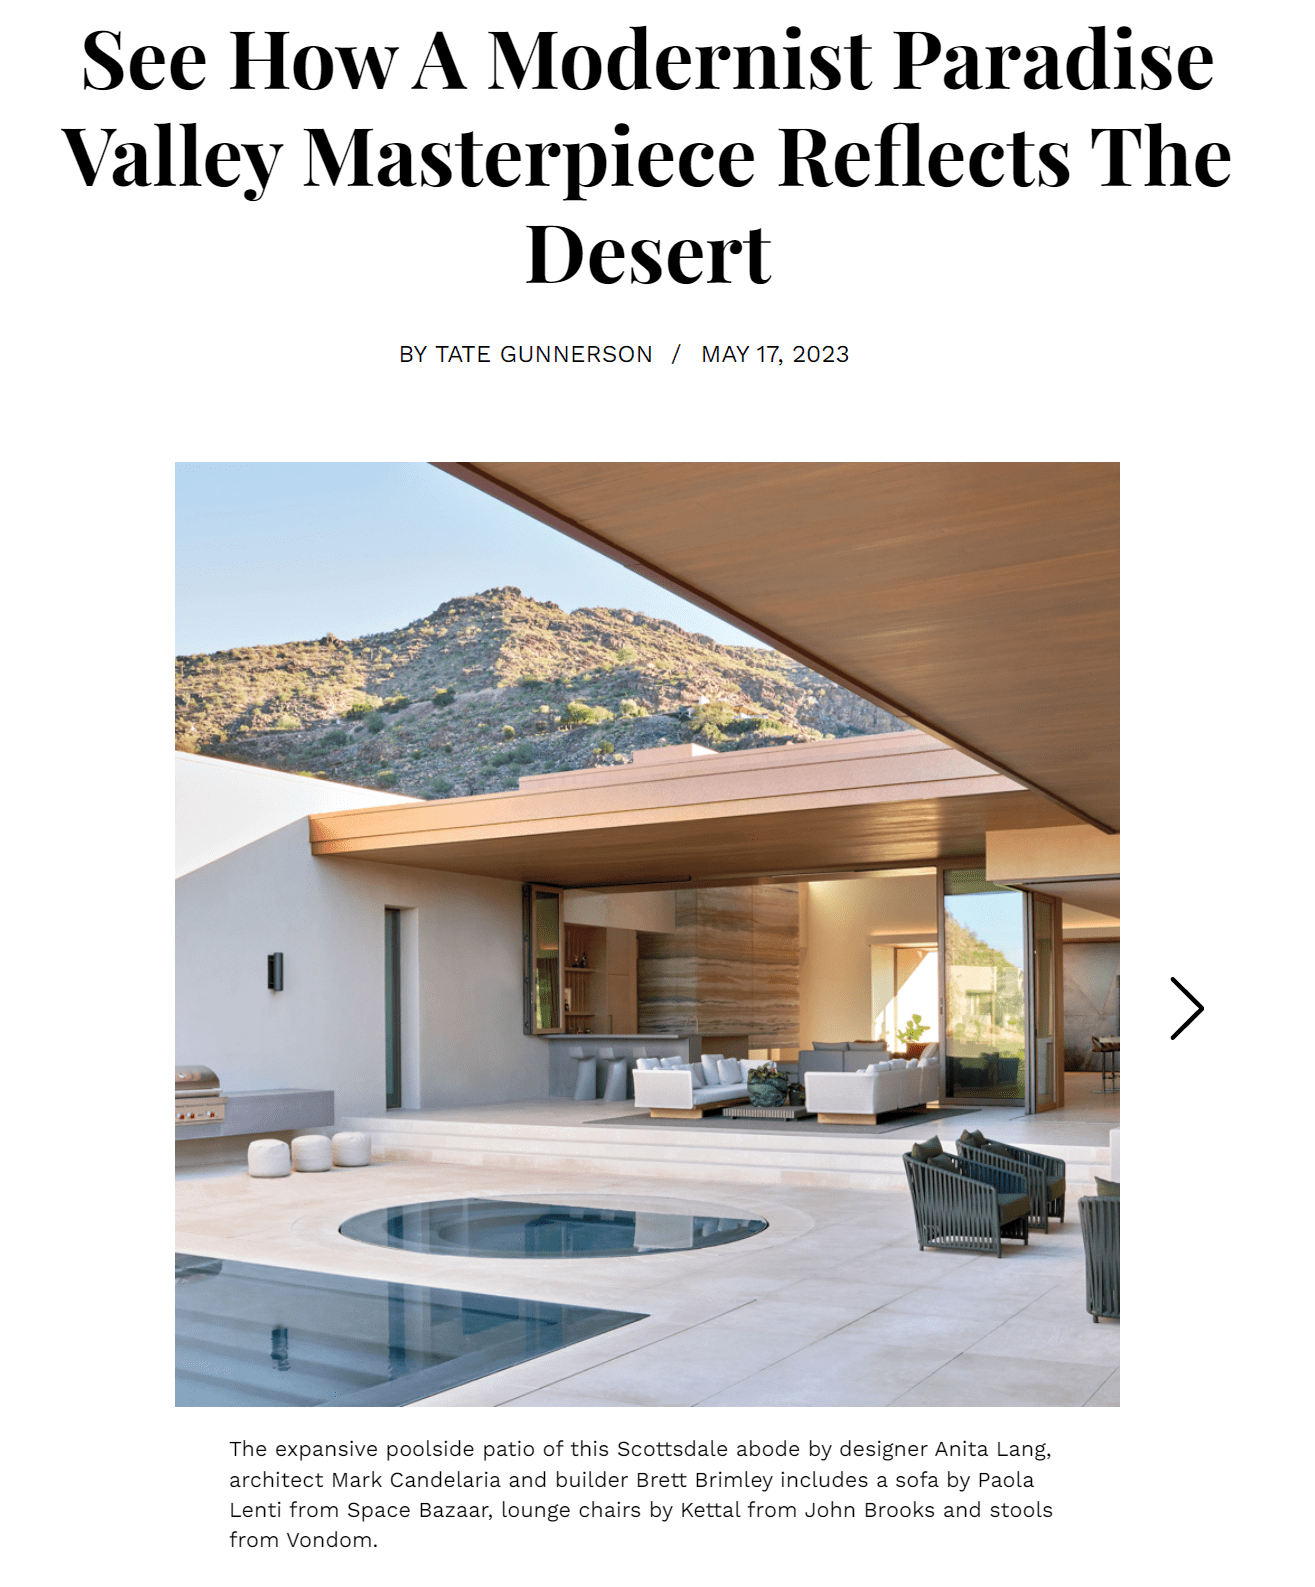 See How A Modernist Paradise Valley Masterpiece Reflects The Desert with IMI Design Studio